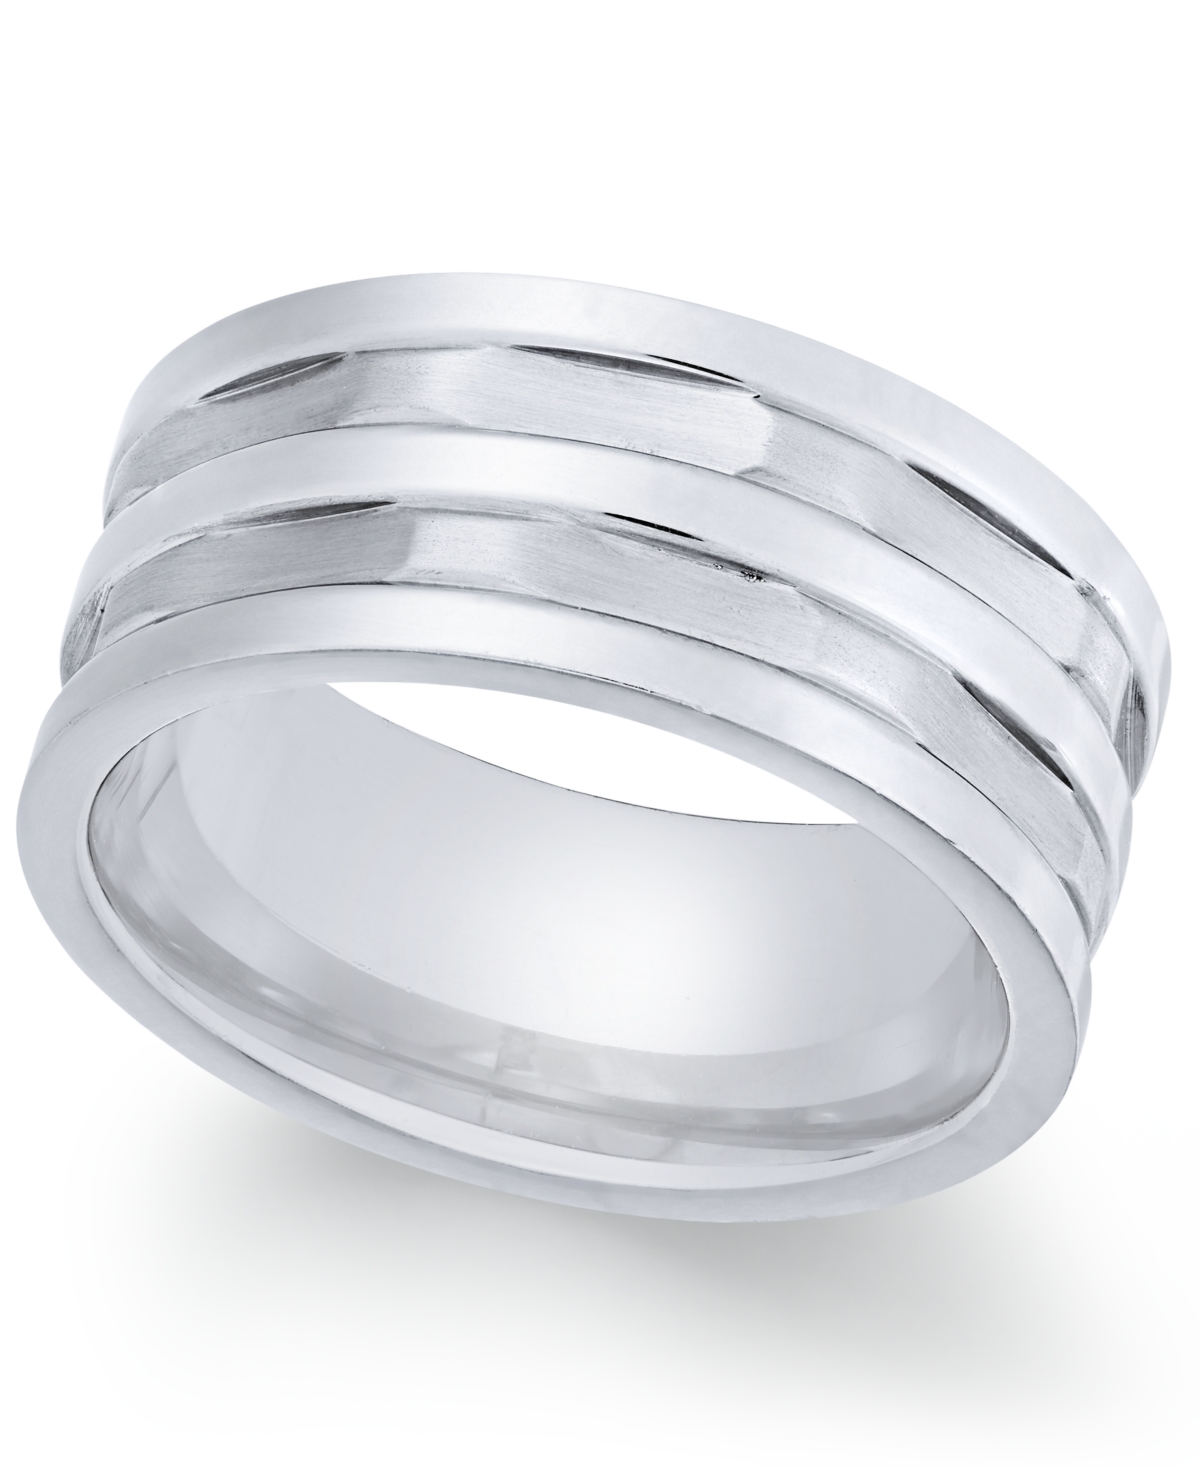 Men's Stainless Steel Multi-Row Cut Band - Silver